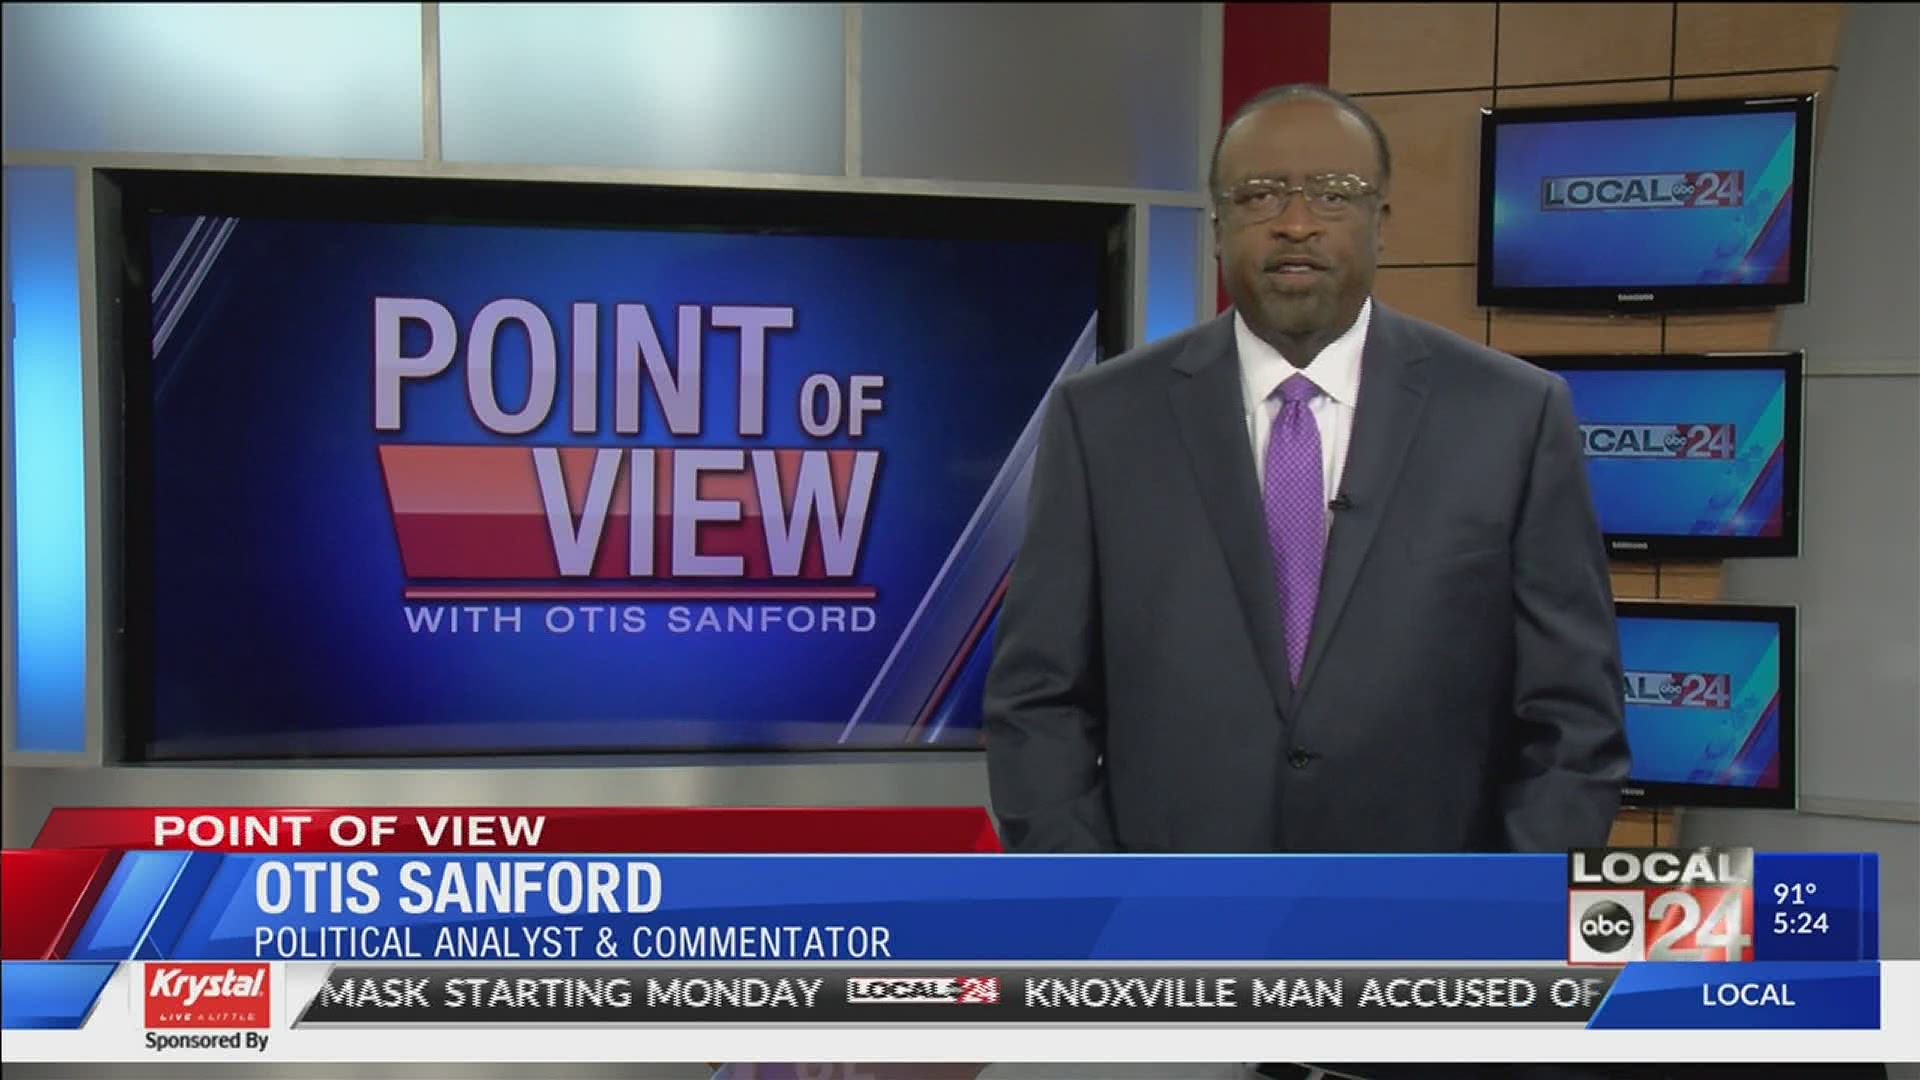 Local 24 News political analyst and commentator Otis Sanford shares his point of view on the Forrest bust at the TN State Capitol.